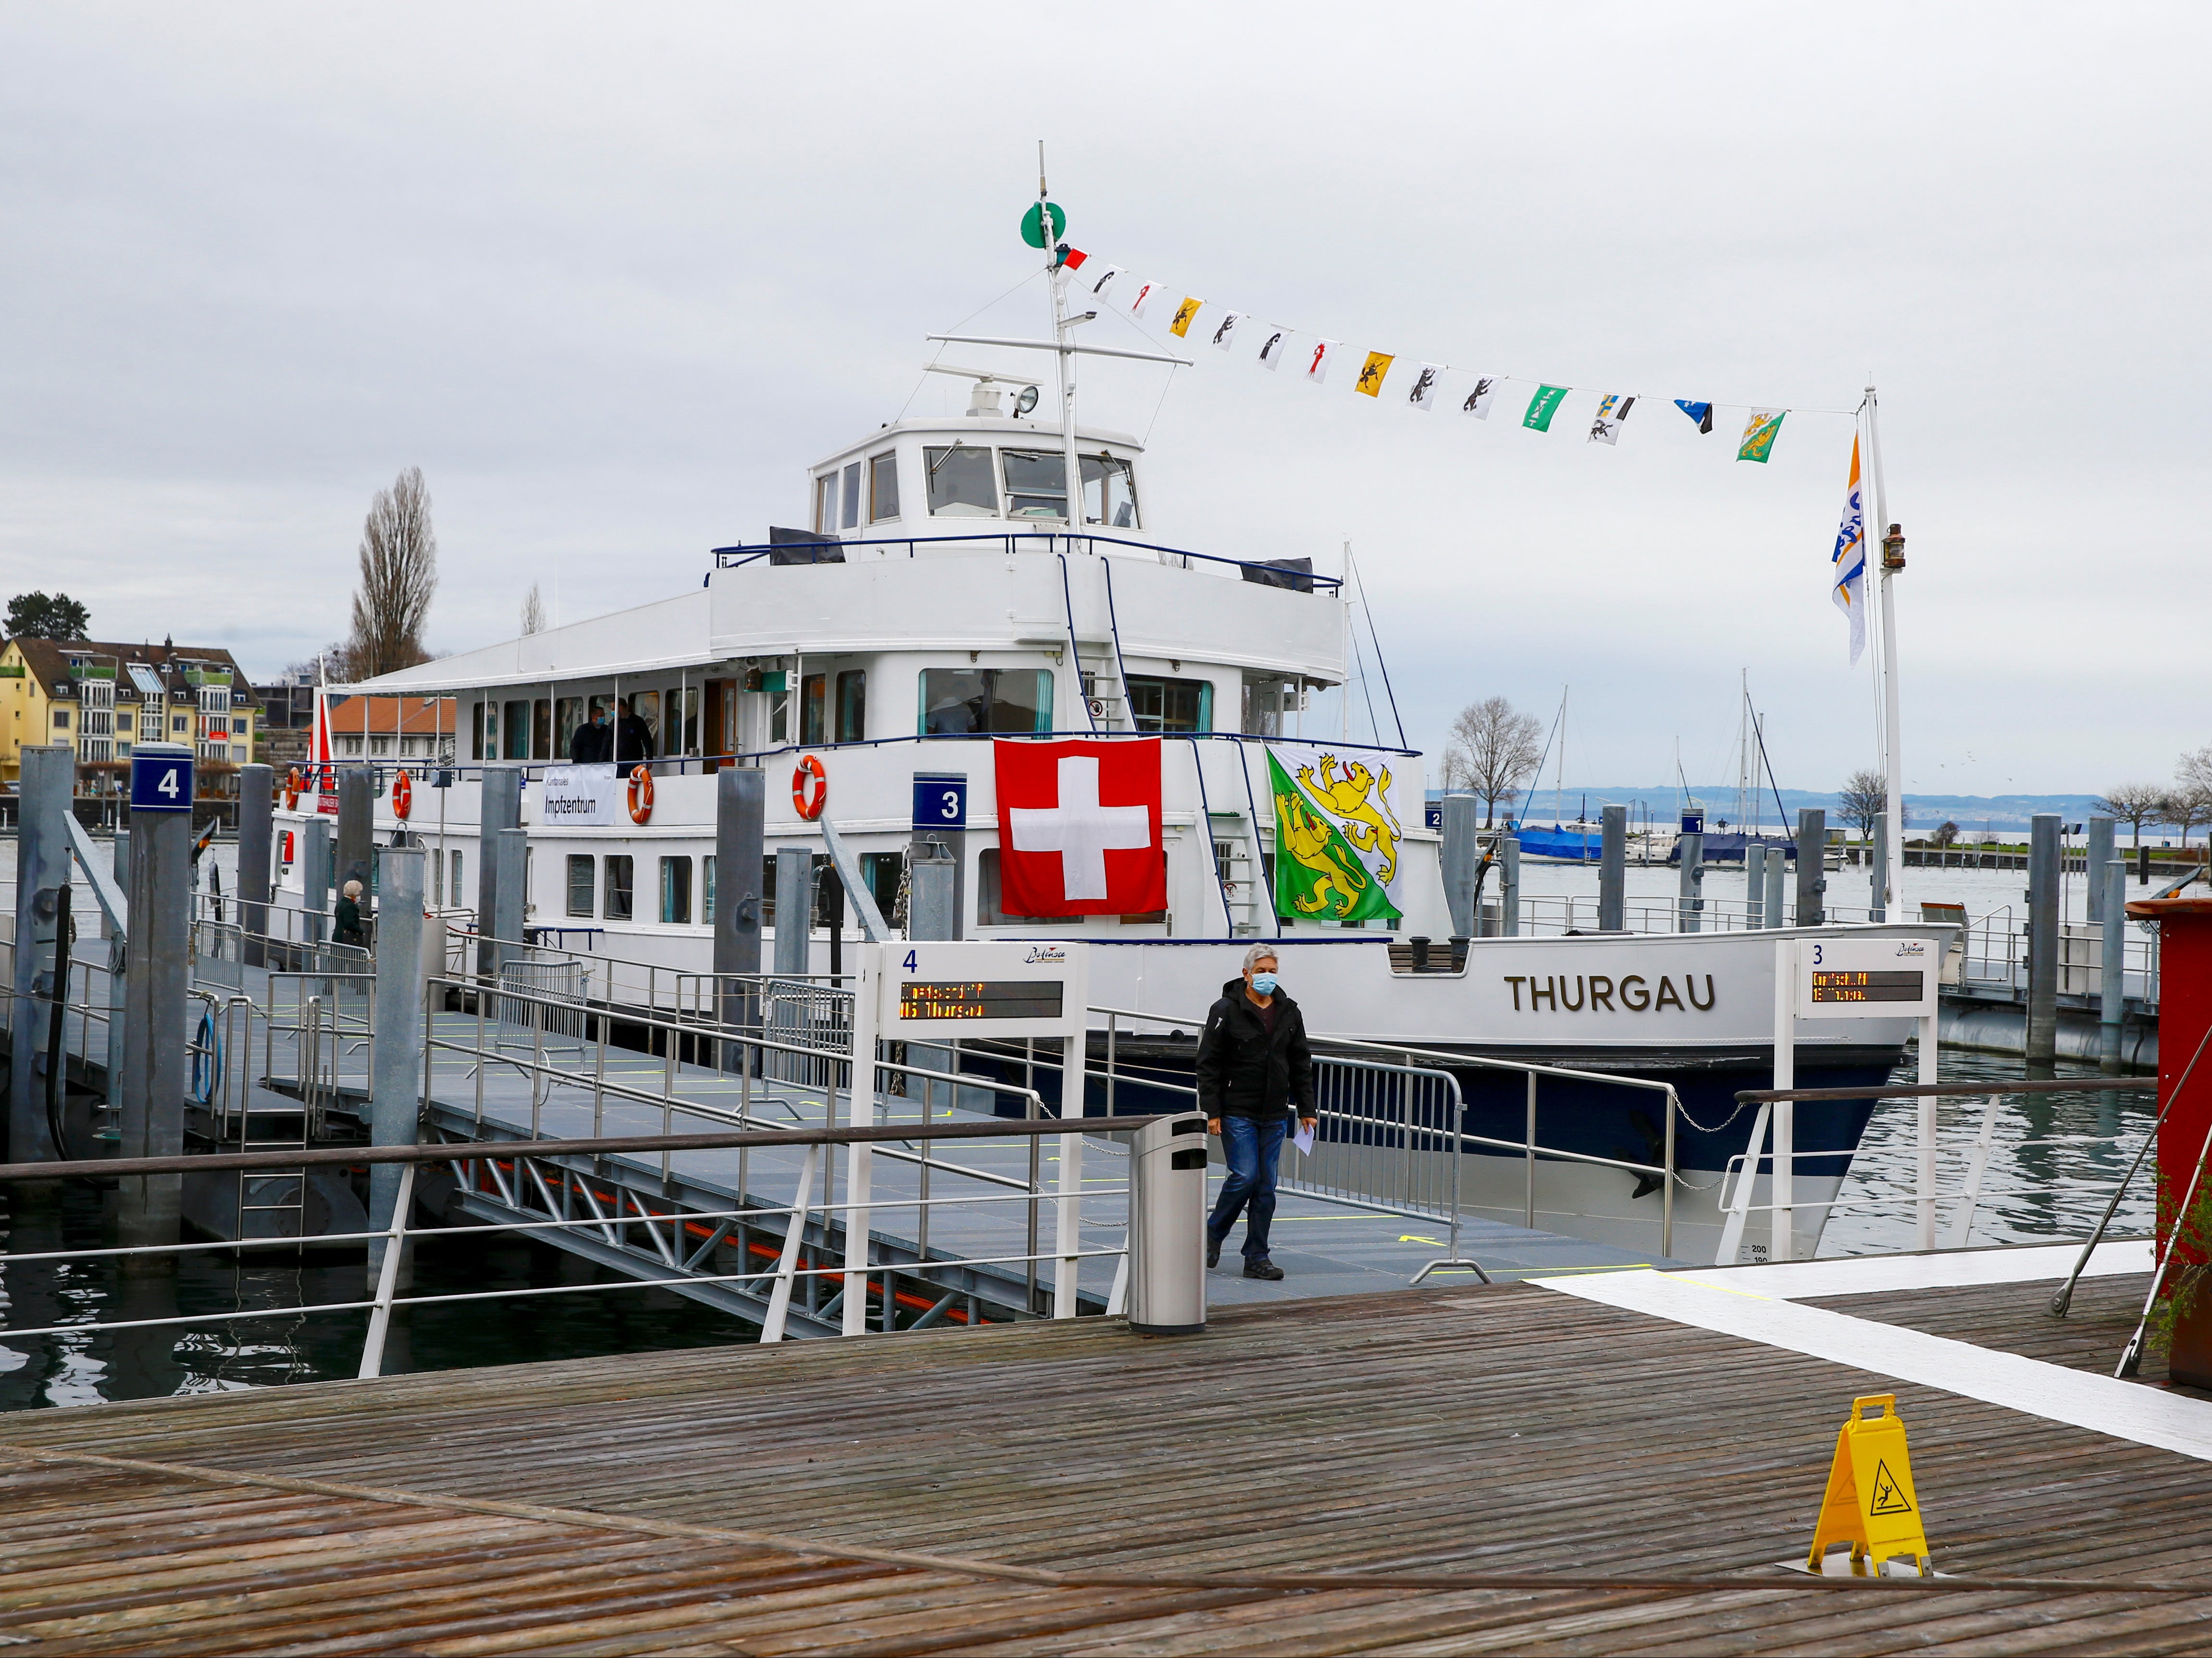 A man walks near a COVID-19 vaccination centre located aboard the MS Thurgau excursion boat in the harbour of Romanshorn on Lake Constance, Switzerland